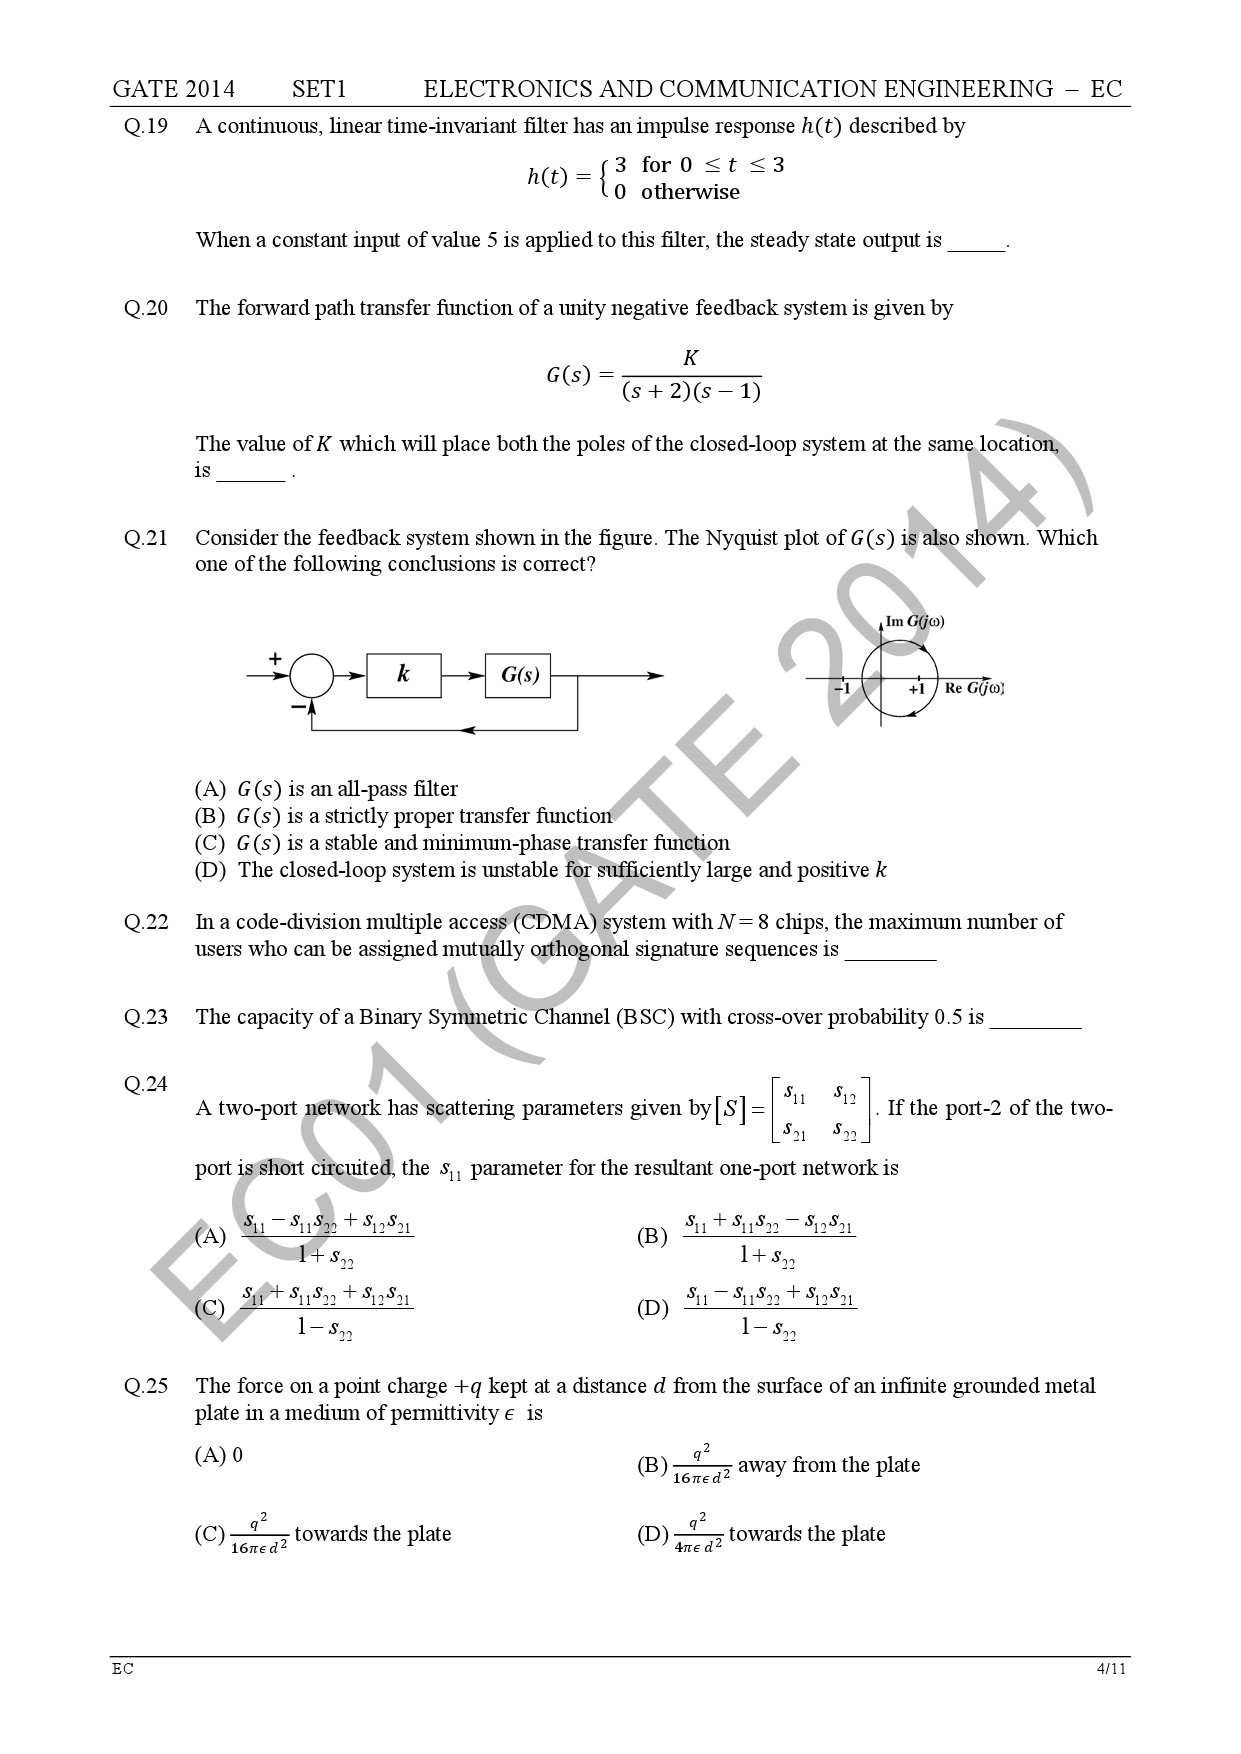 GATE Exam Question Paper 2014 Electronics and Communication Engineering Set 1 10